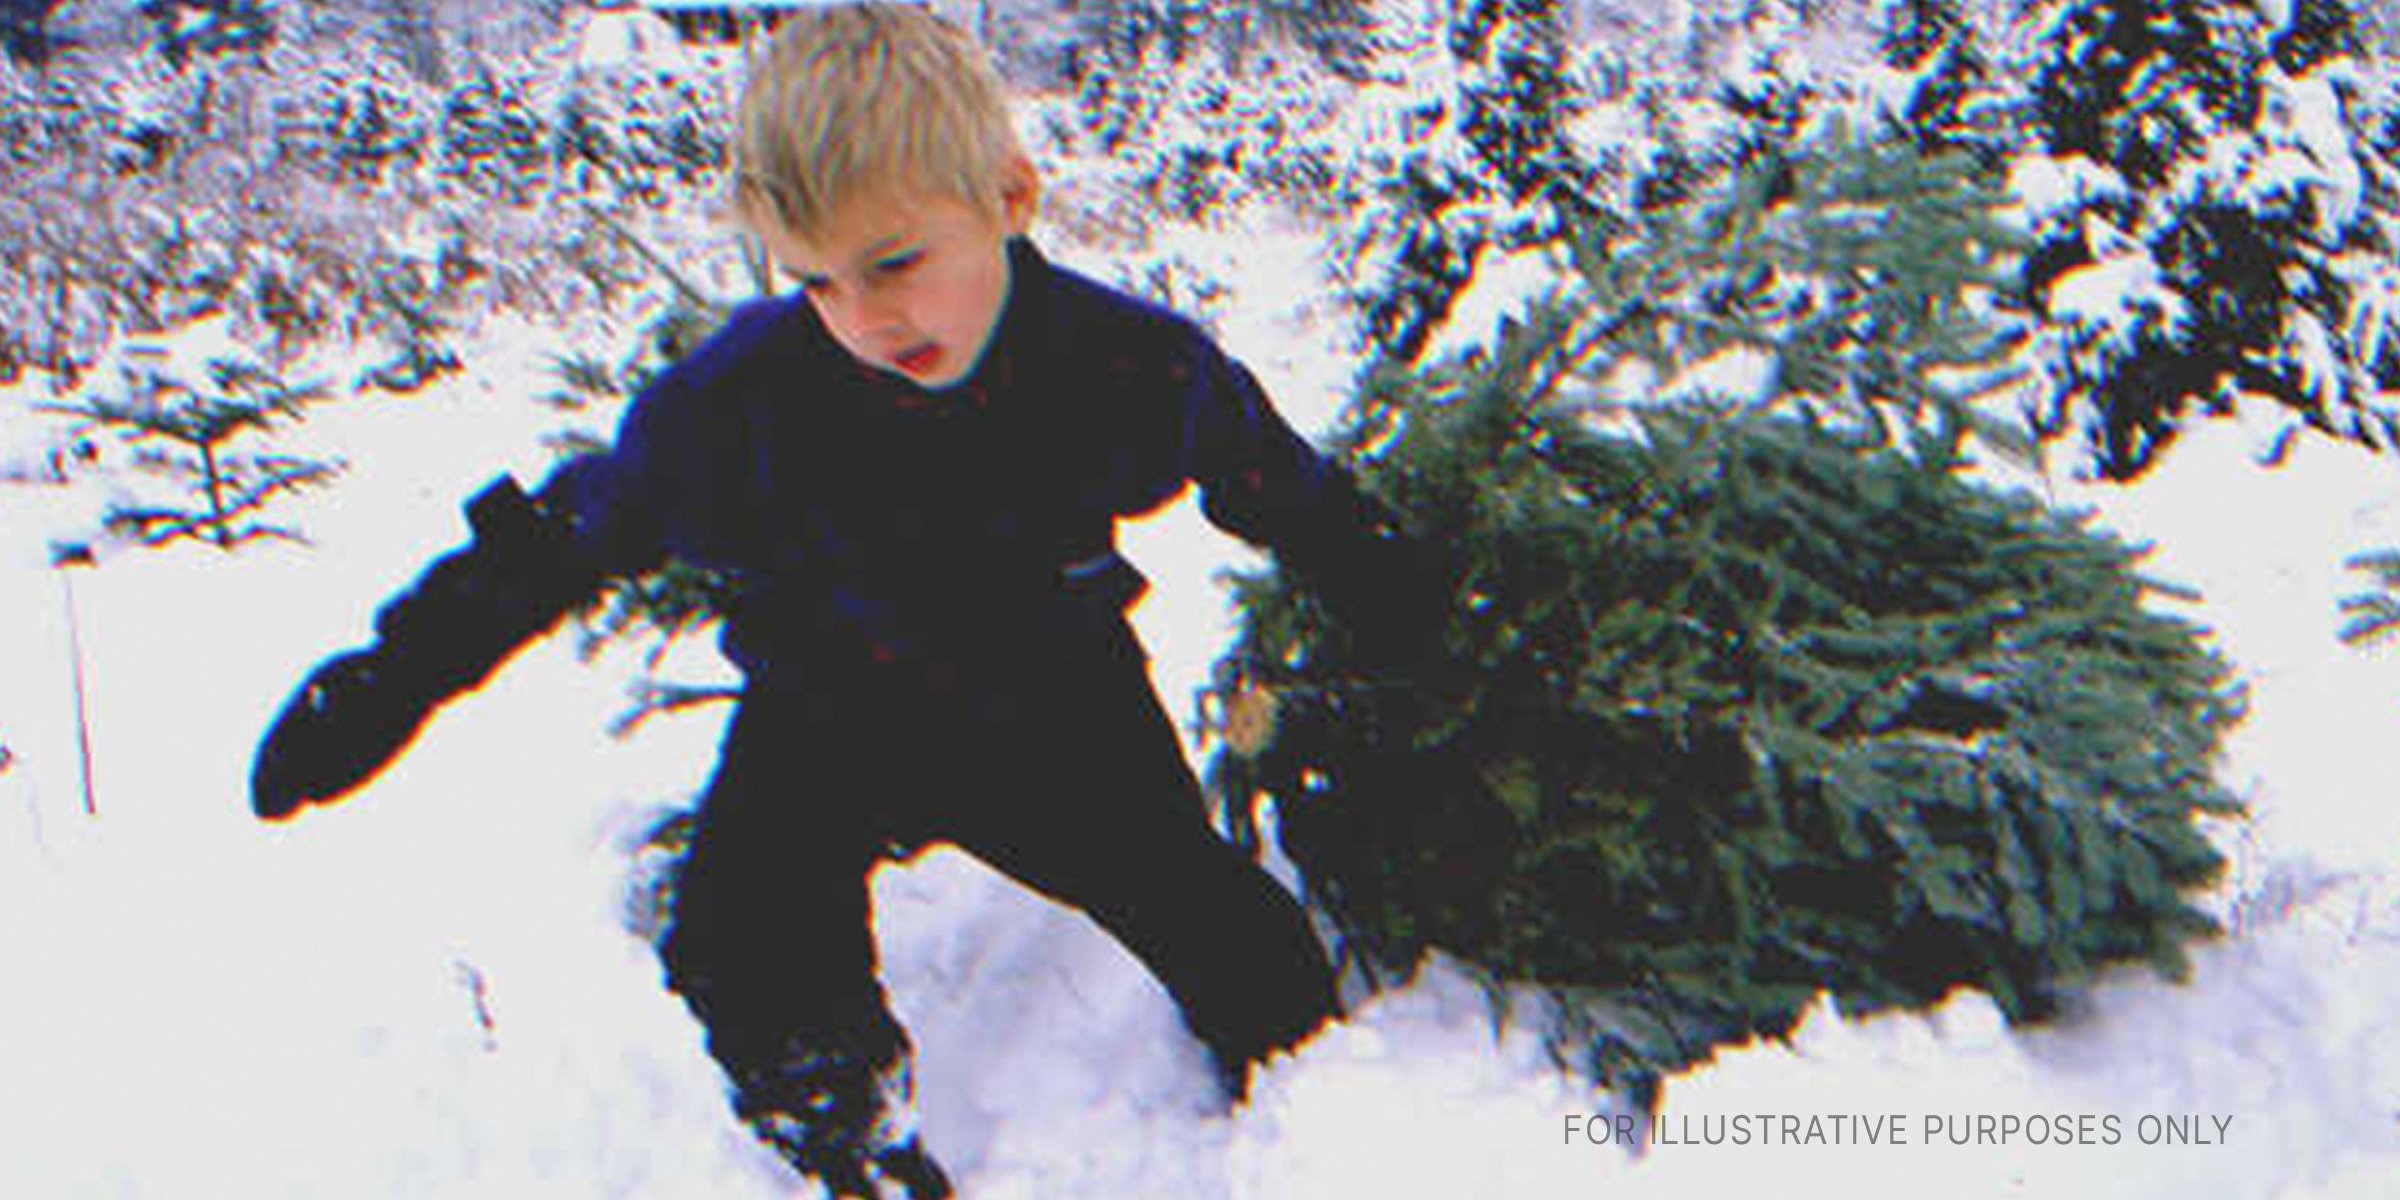 Little boy pulling a Christmas tree | Source: Getty Images